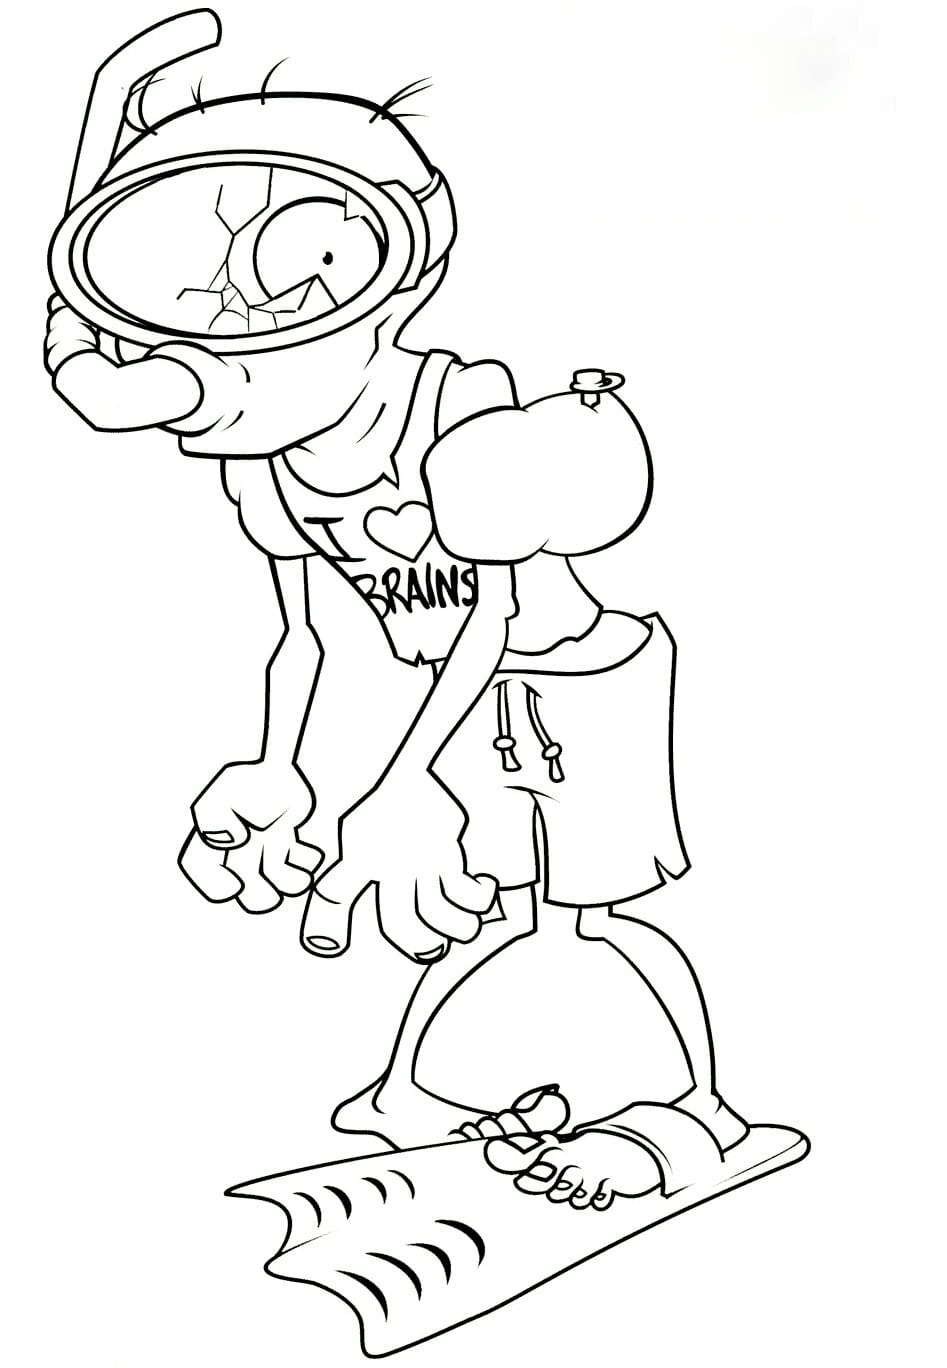 Plants Vs Zombies Coloring Pages Coloring Pages For Kids And Adults